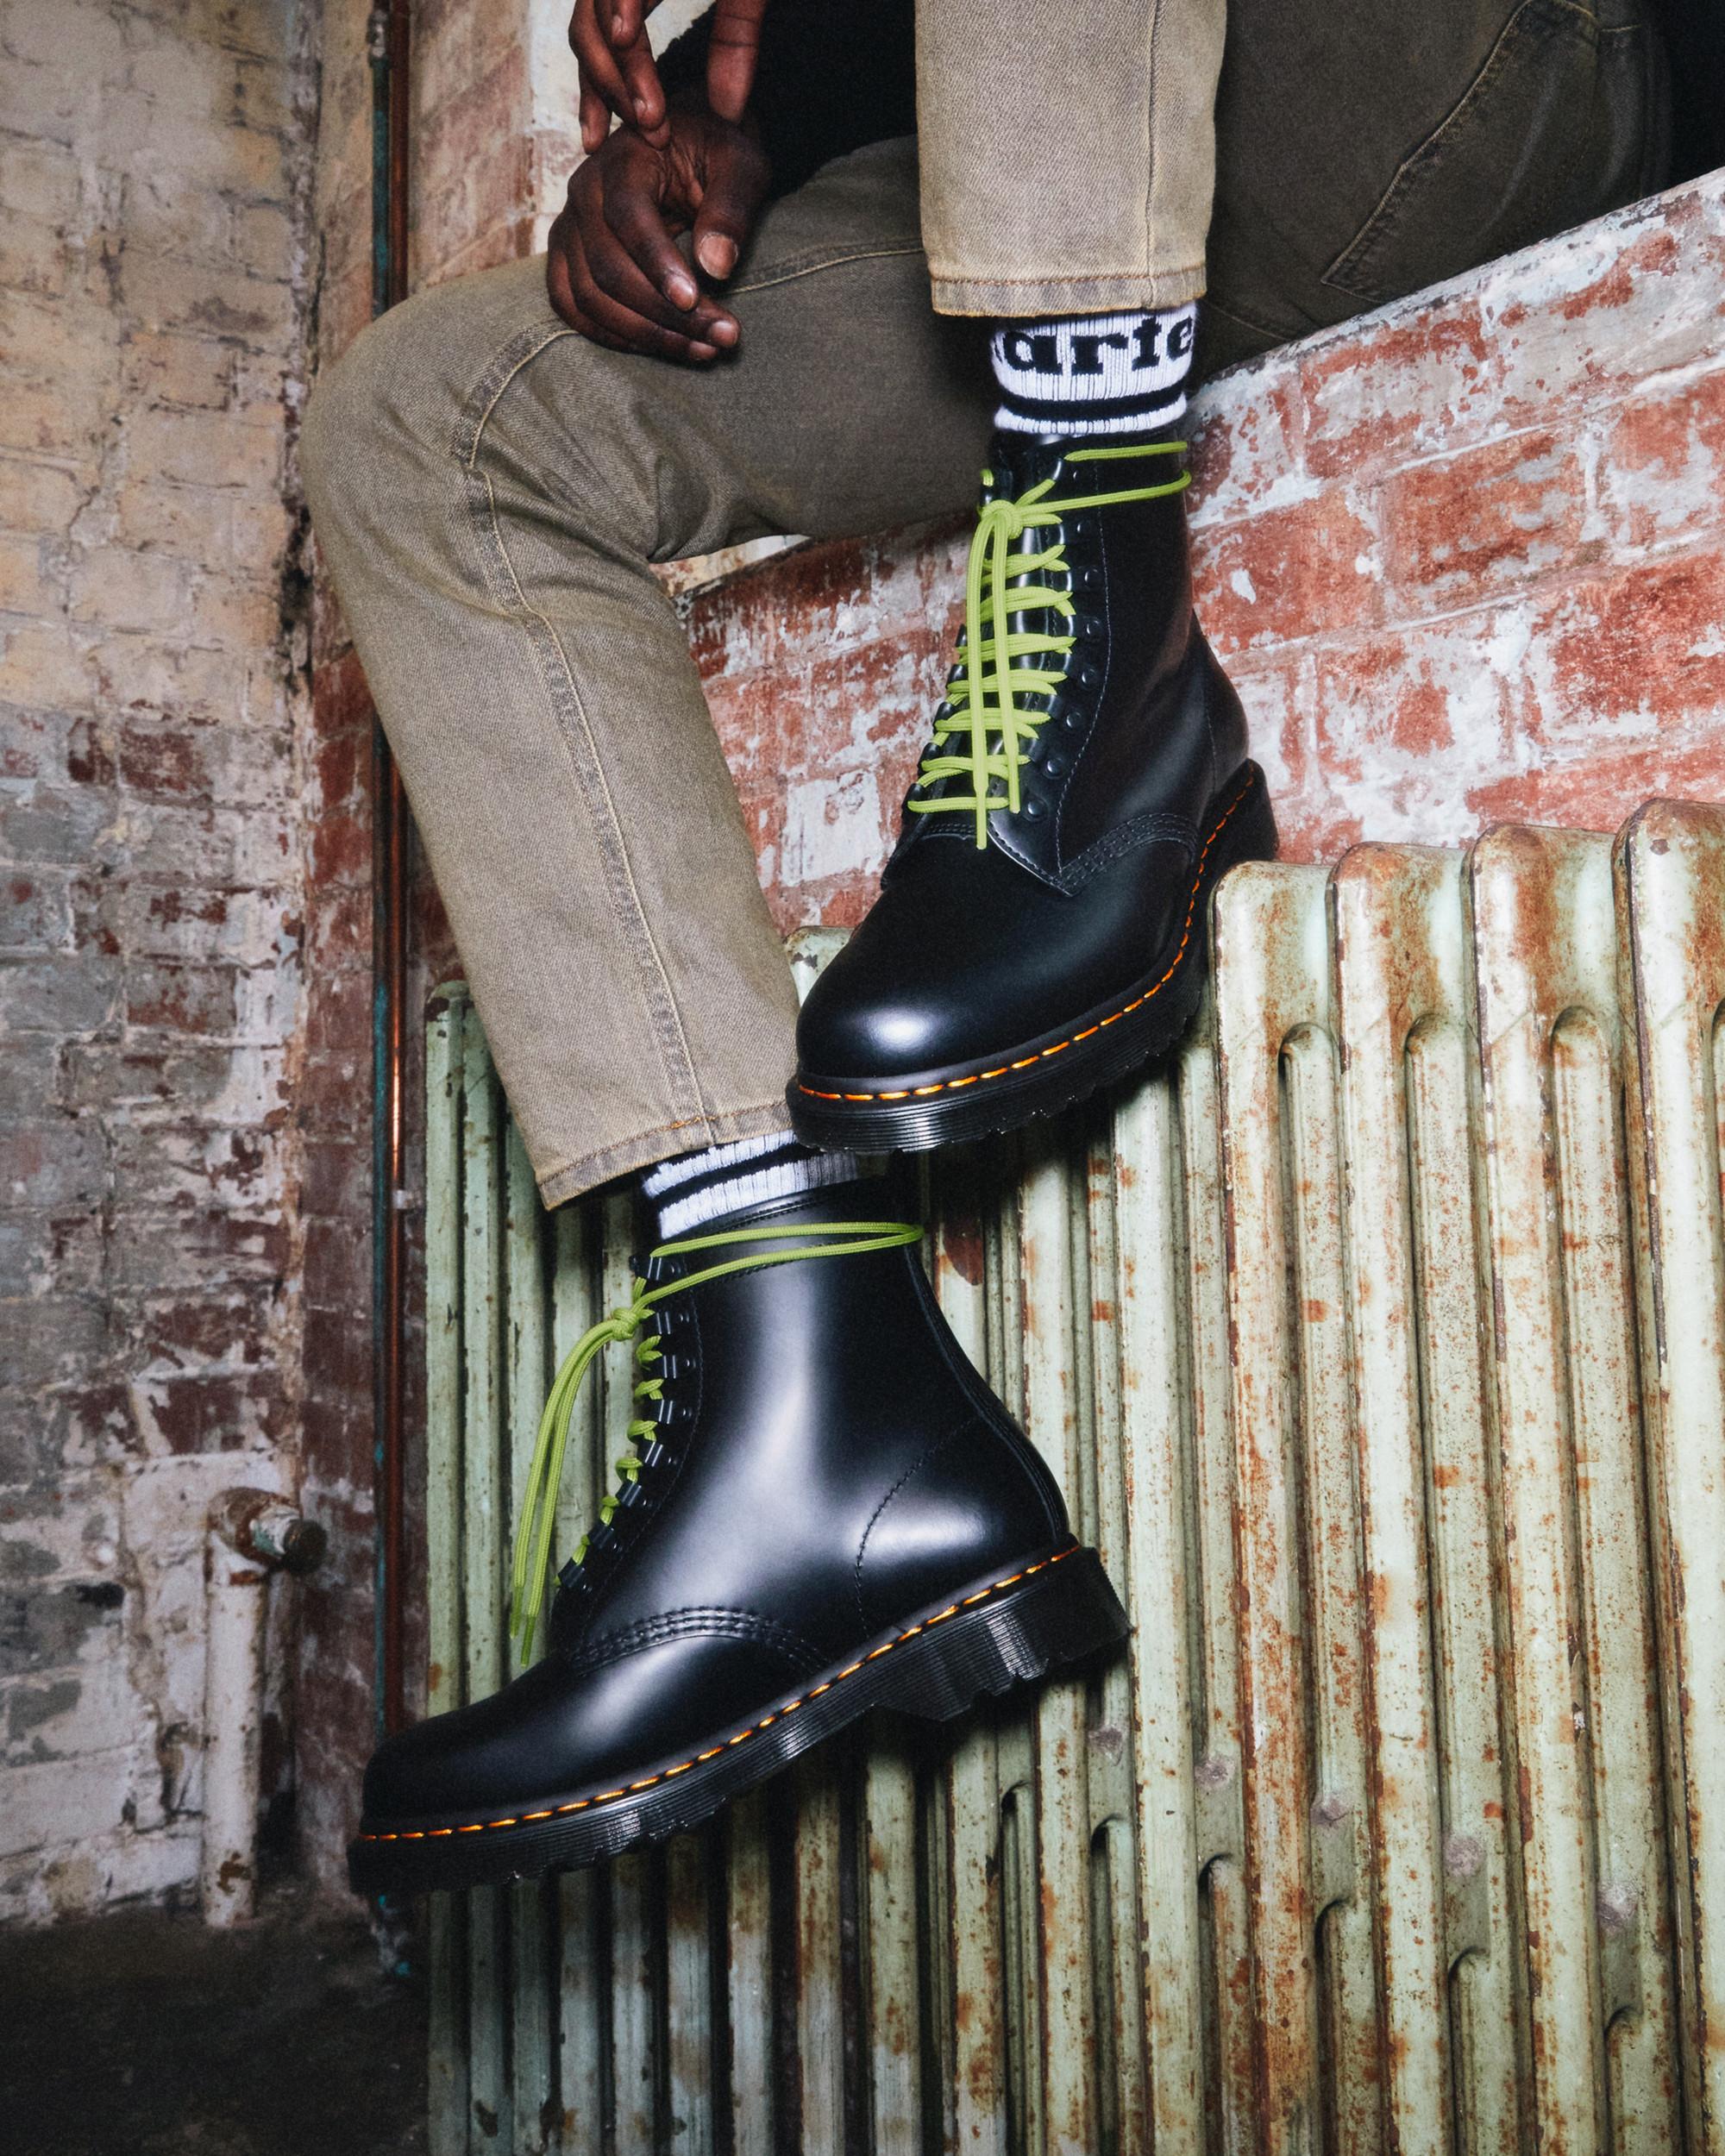 1460 Ben Smooth Leather Ankle Boots in Black | Dr. Martens